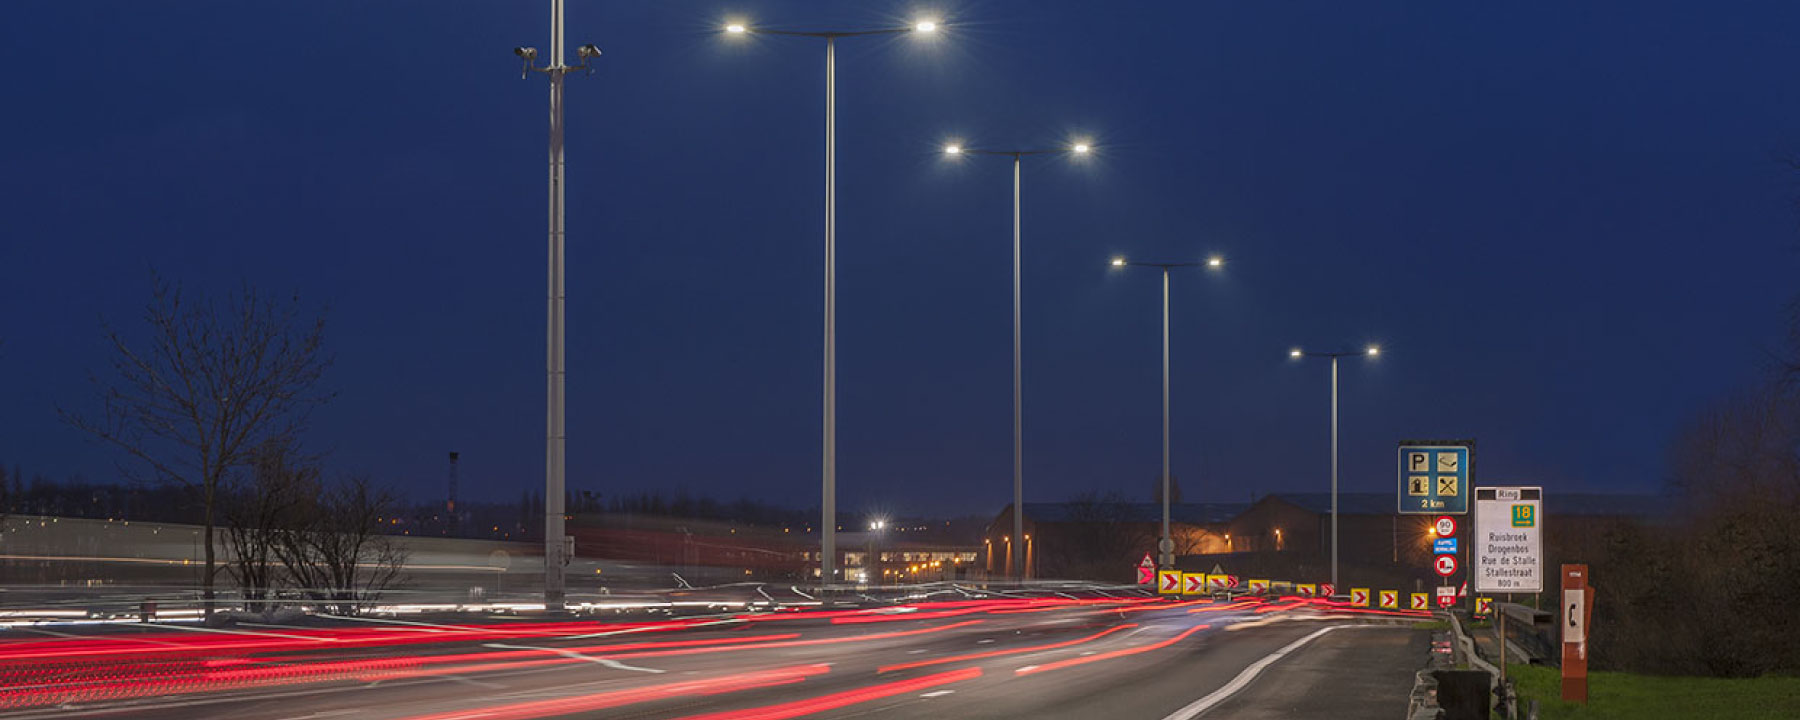 Install LED lighting solutions to reduce energy consumption and carbon footprint 